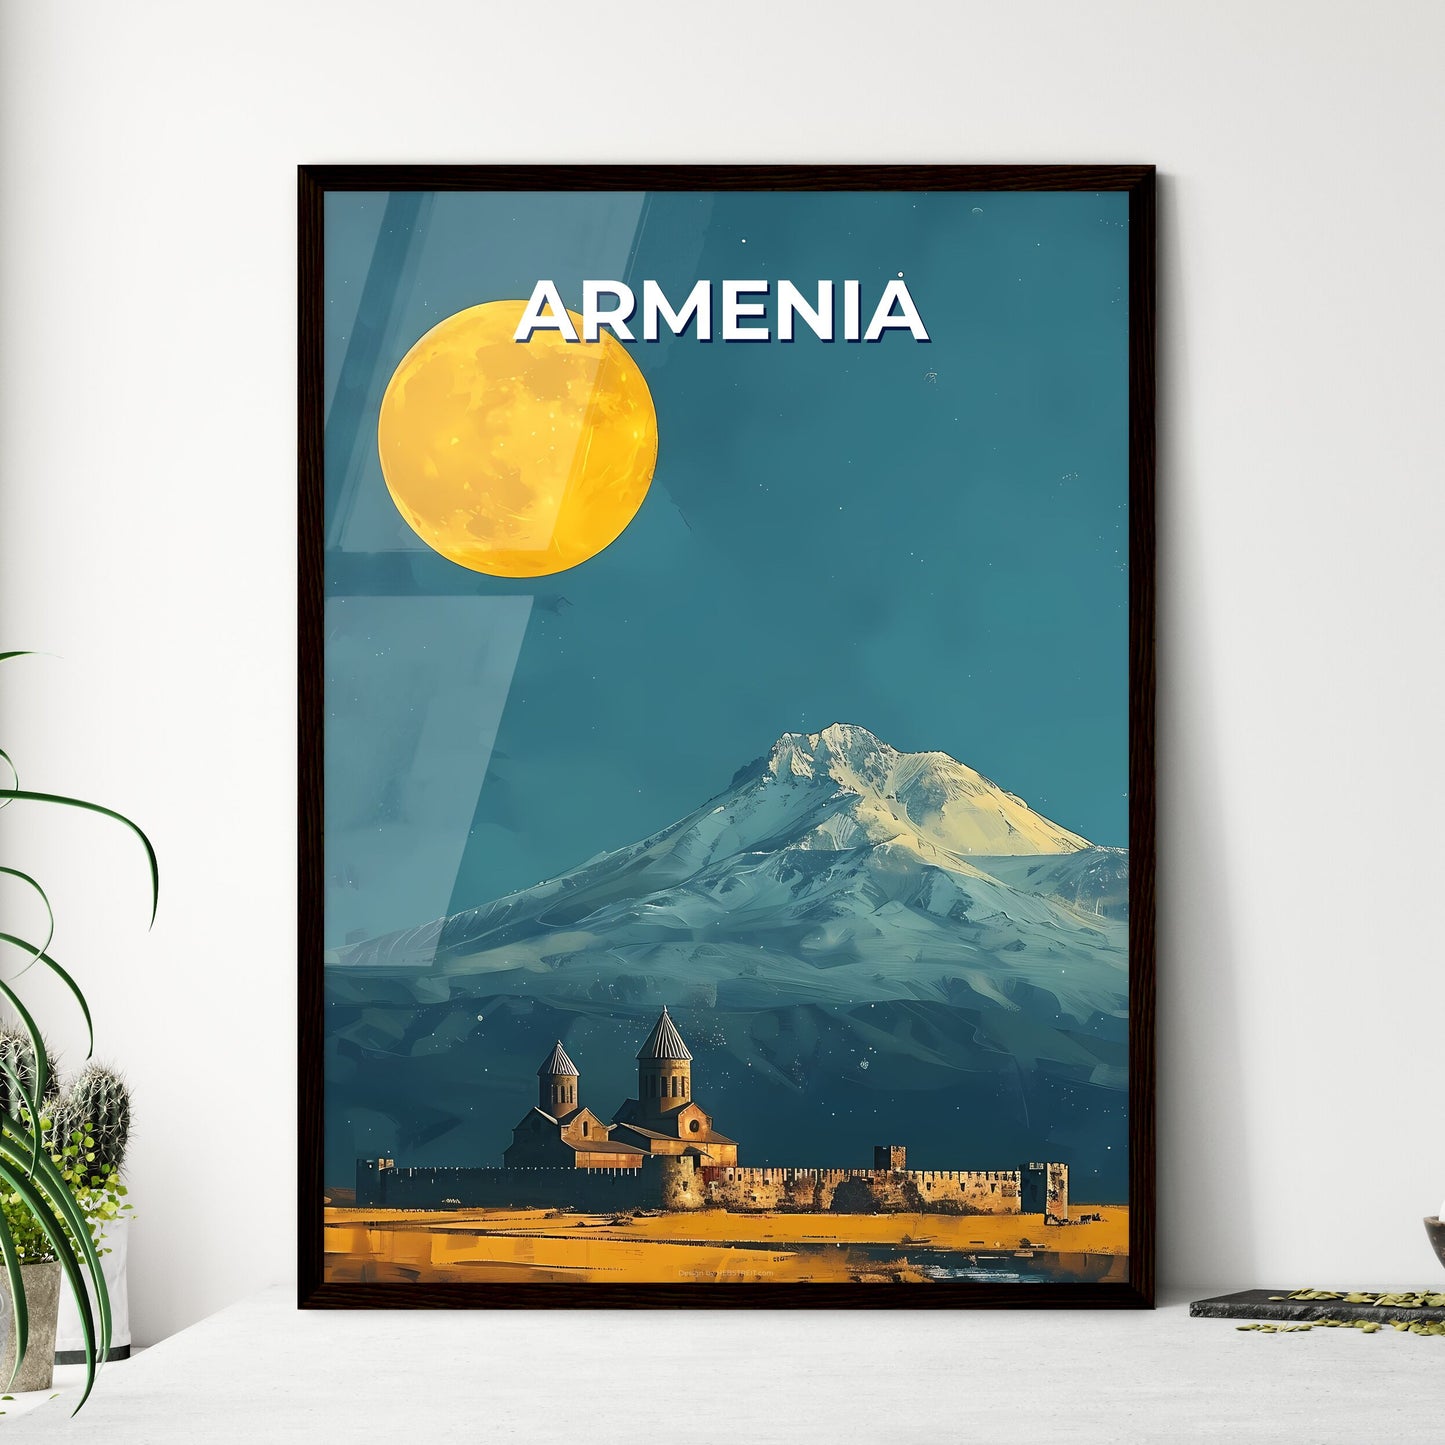 Vibrant Contemporary Painting of Moonlit Mountain Landscape in Armenia, Europe